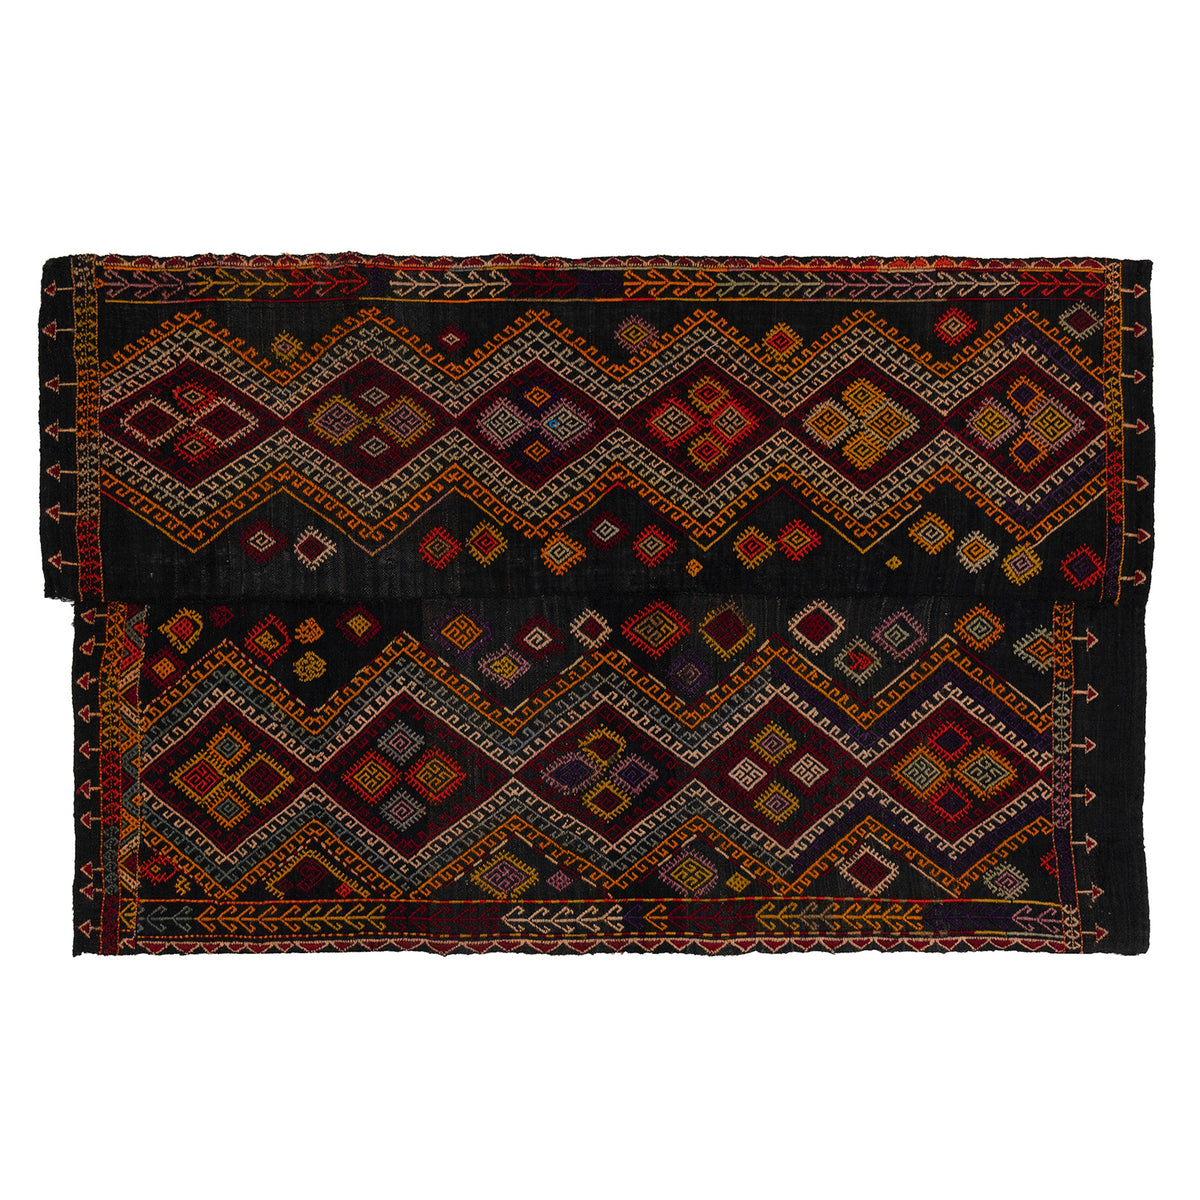 Small old Kilim rug no. K372, size 162 x 102 cm, 60-70 years old